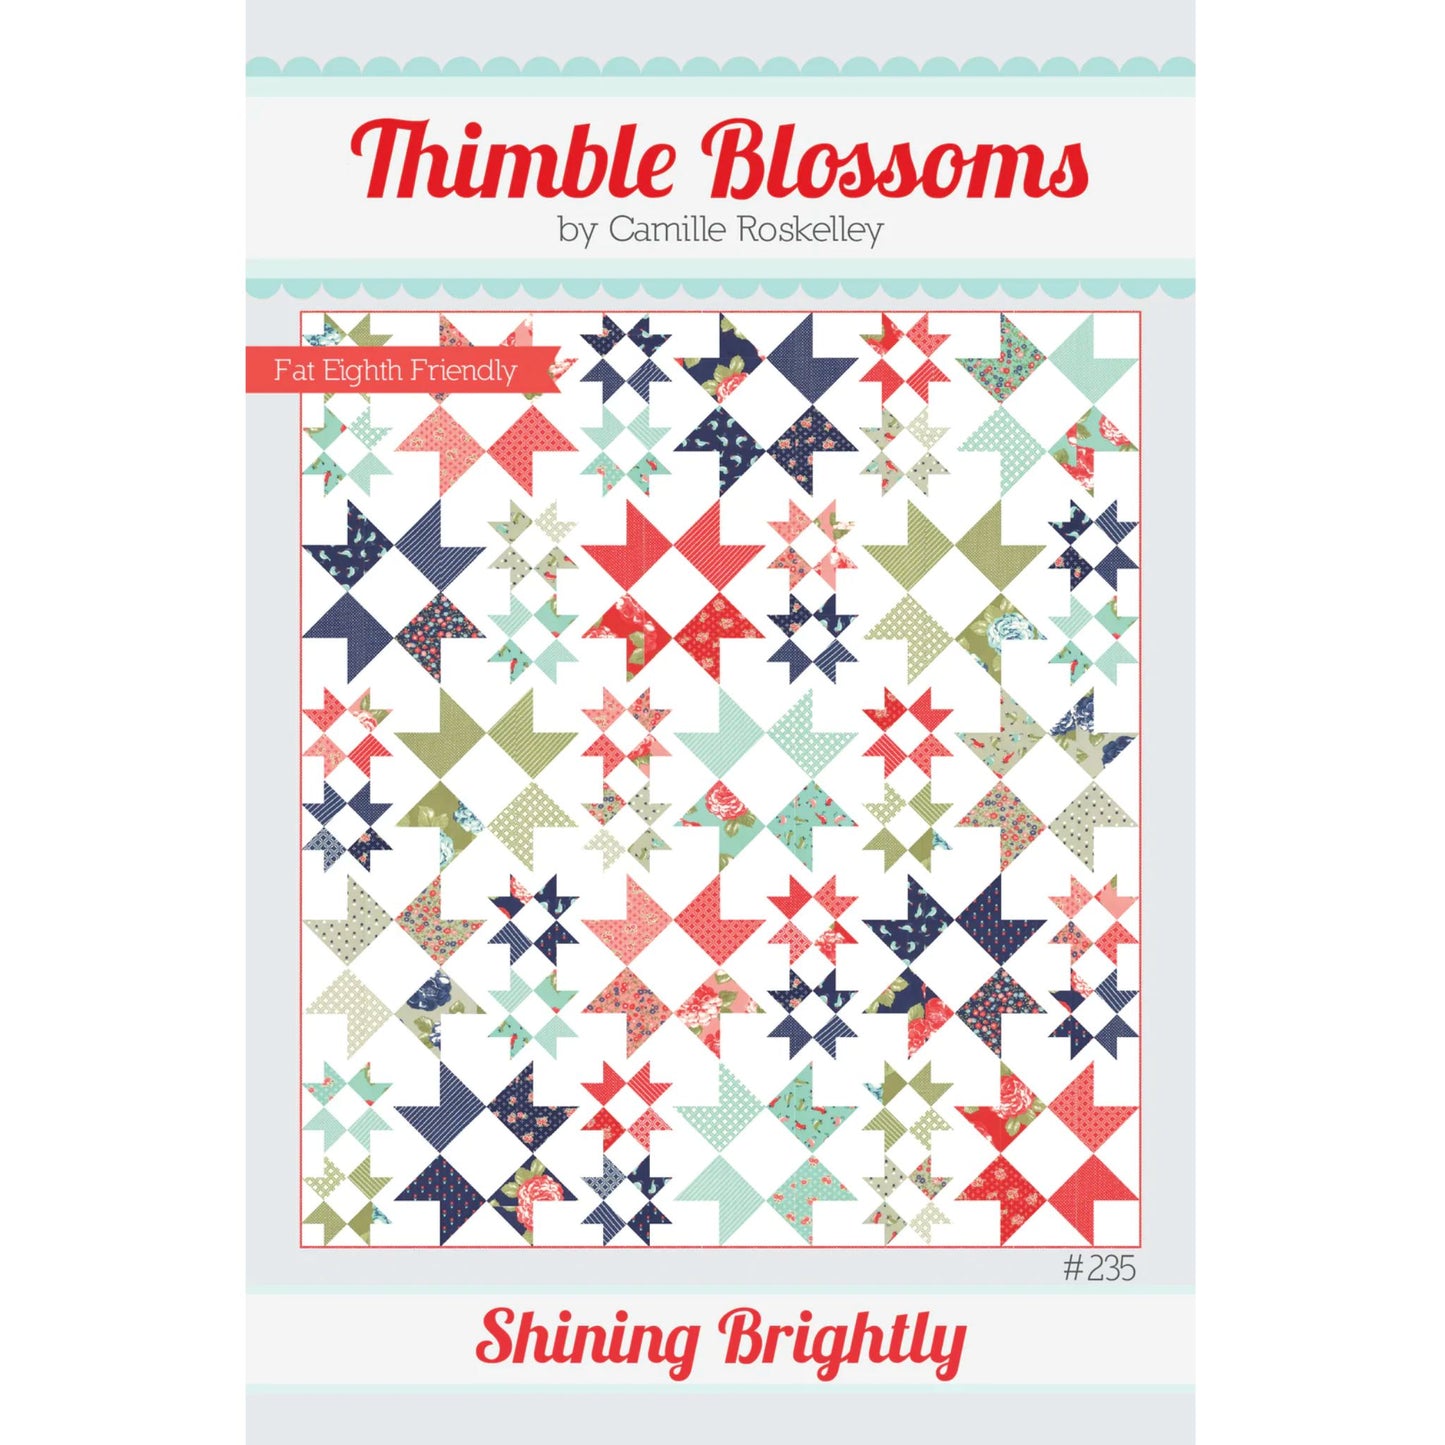 Shining Brightly by Thimble Blossoms